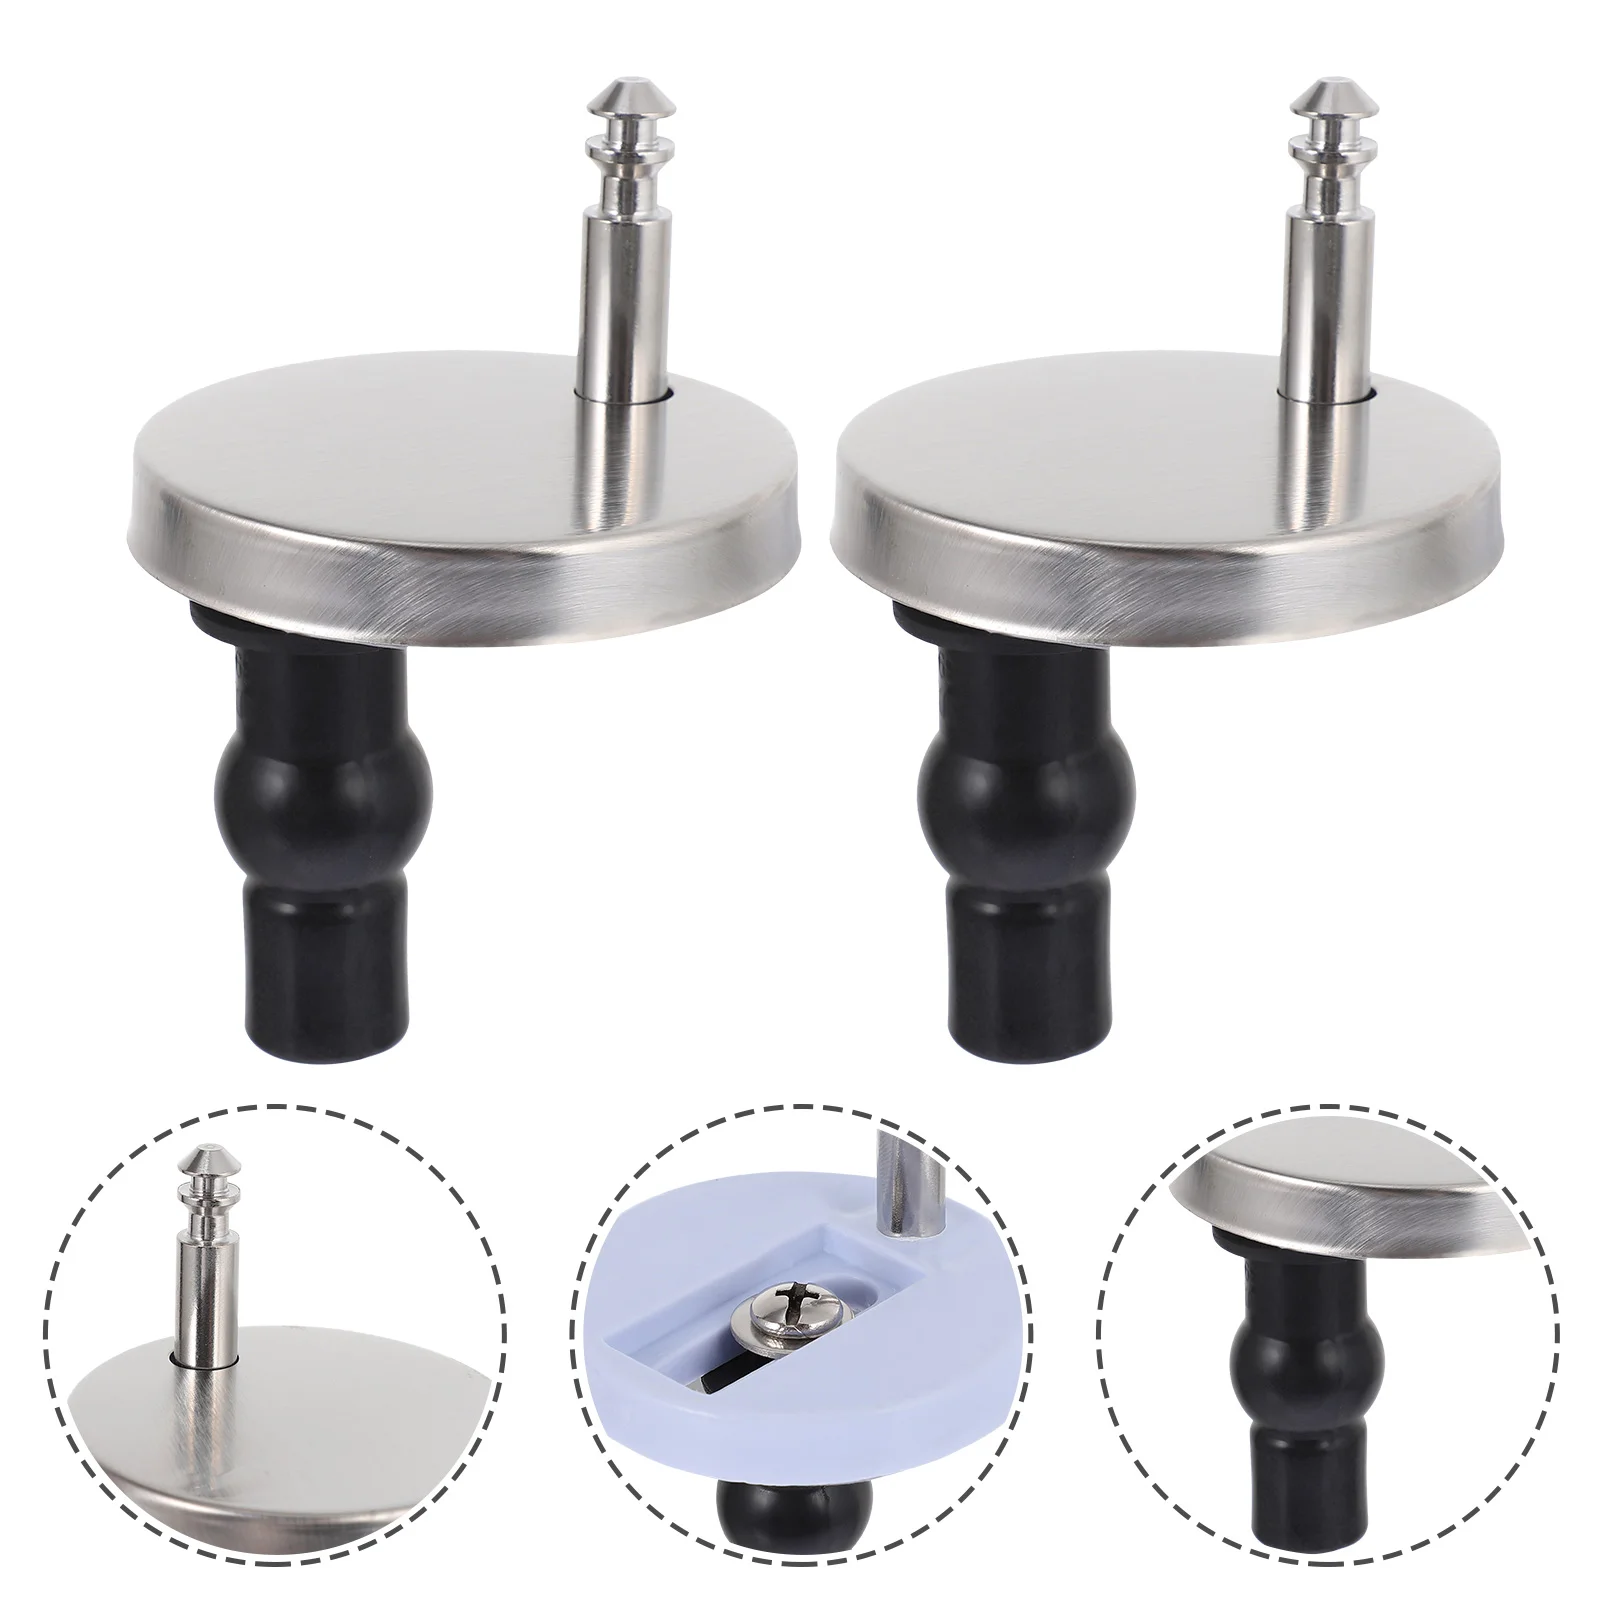 

Toilet Bolts Screws Screw Lid Hinges Seats Bolt Fixing Replacement Hinge Parts Round Toilets Standard Fixed Mounting Elongated